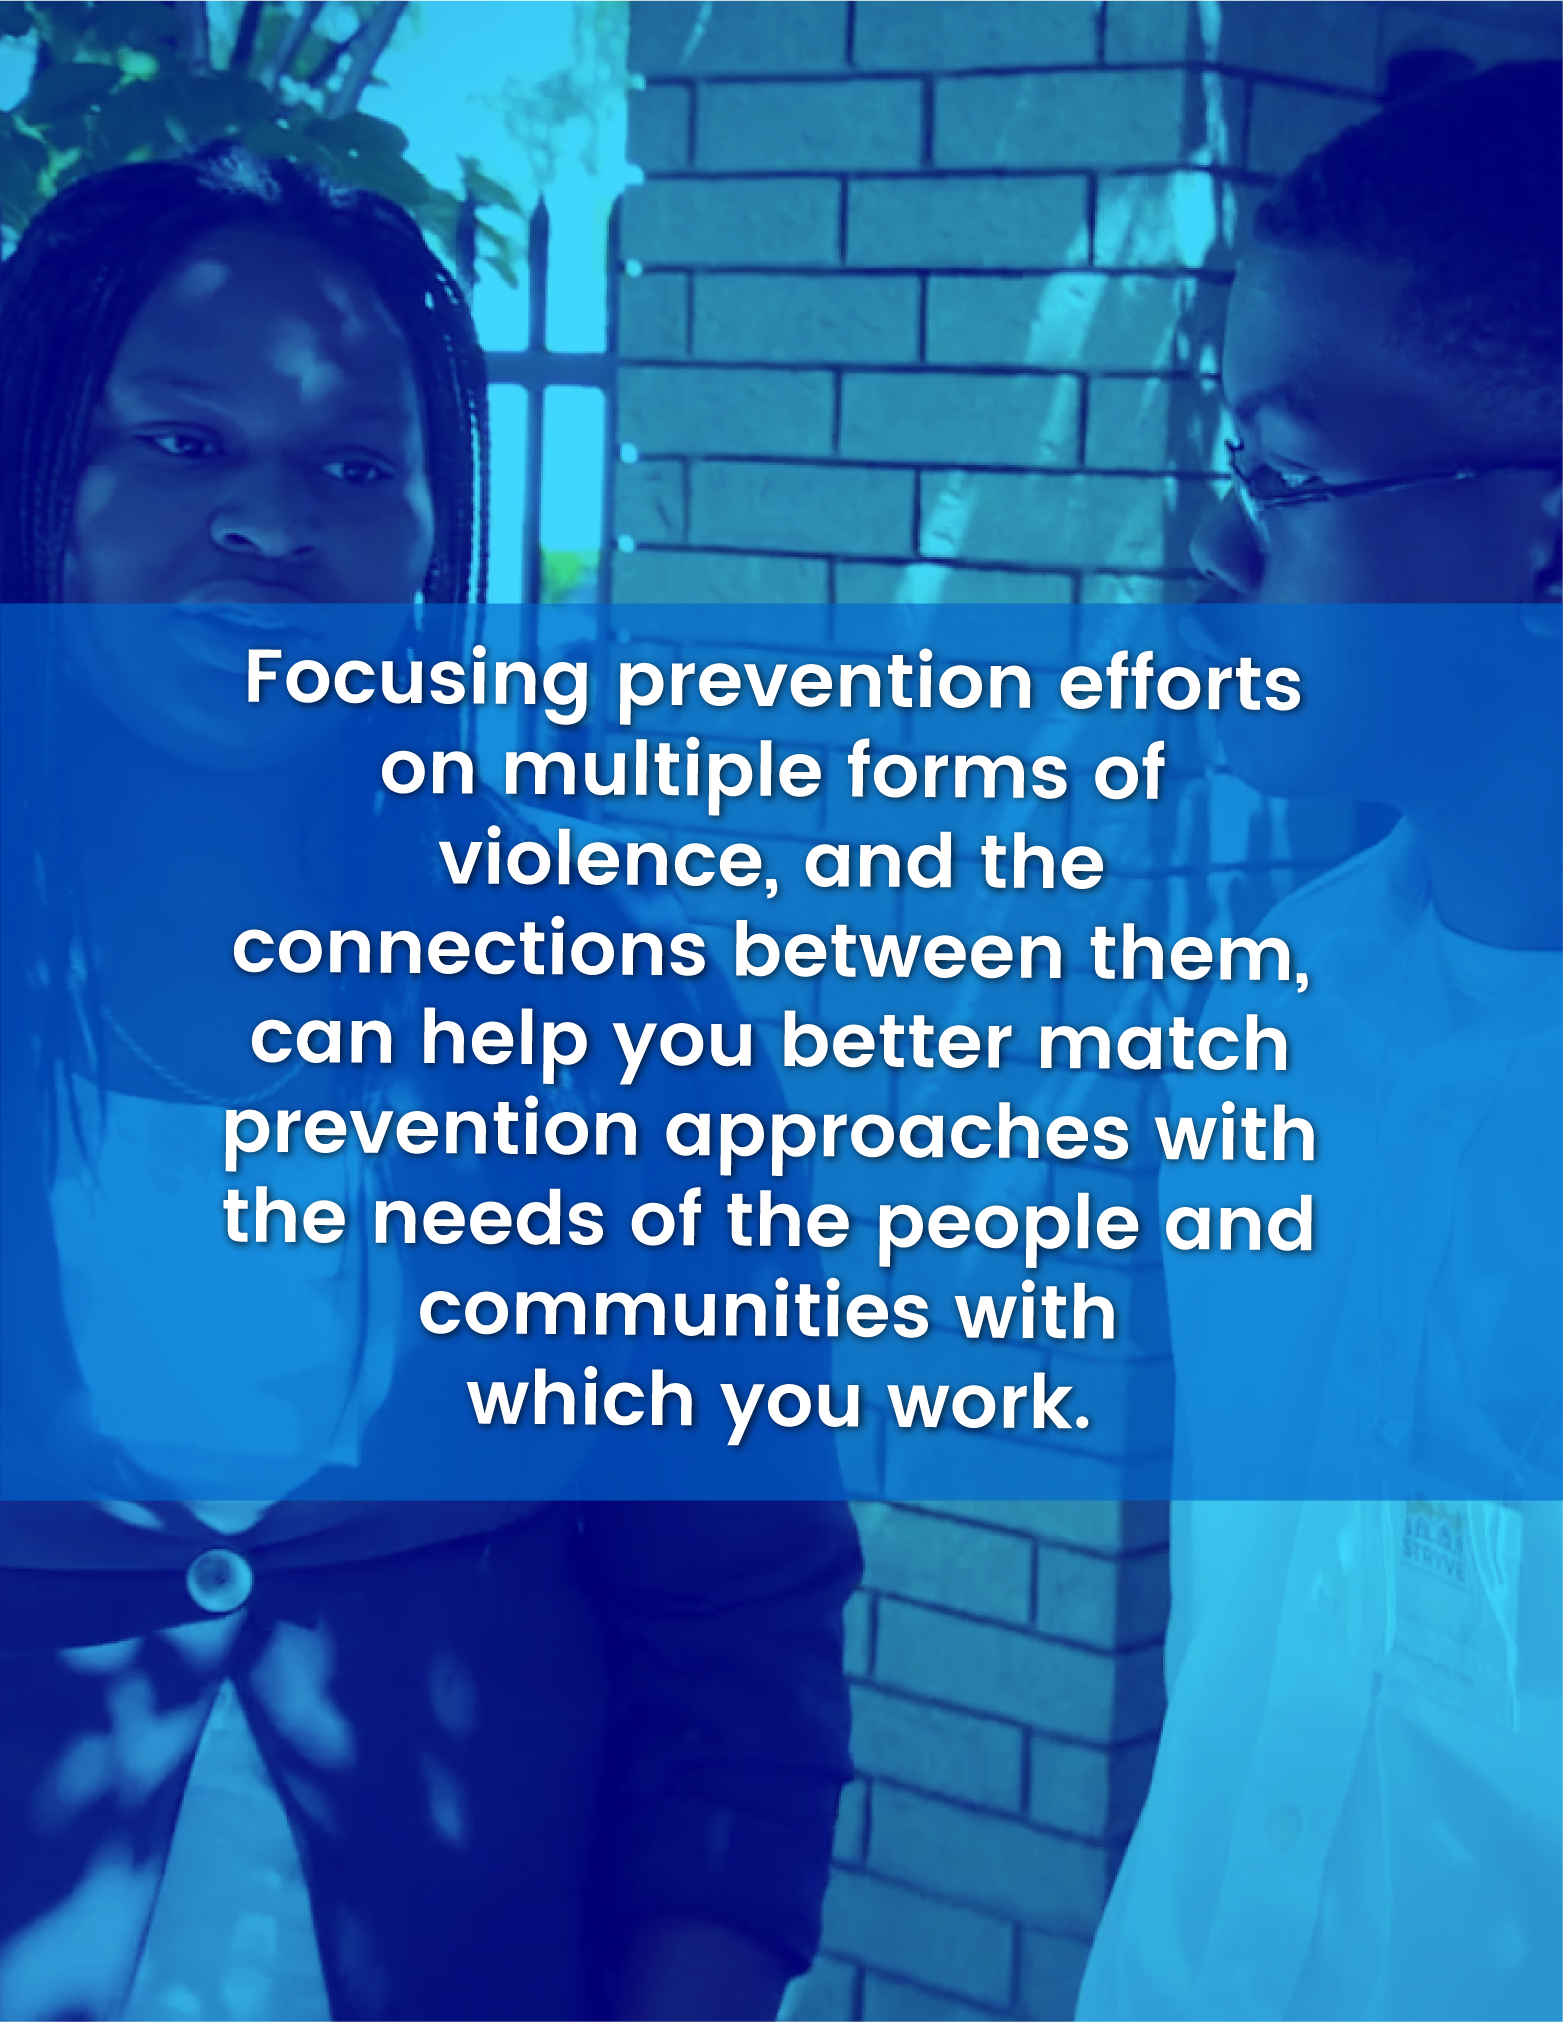 Focusing prevention efforts on multiple forms of violence, and the connections between them, can help you better match prevention approaches with the needs of the people and communities with which you work